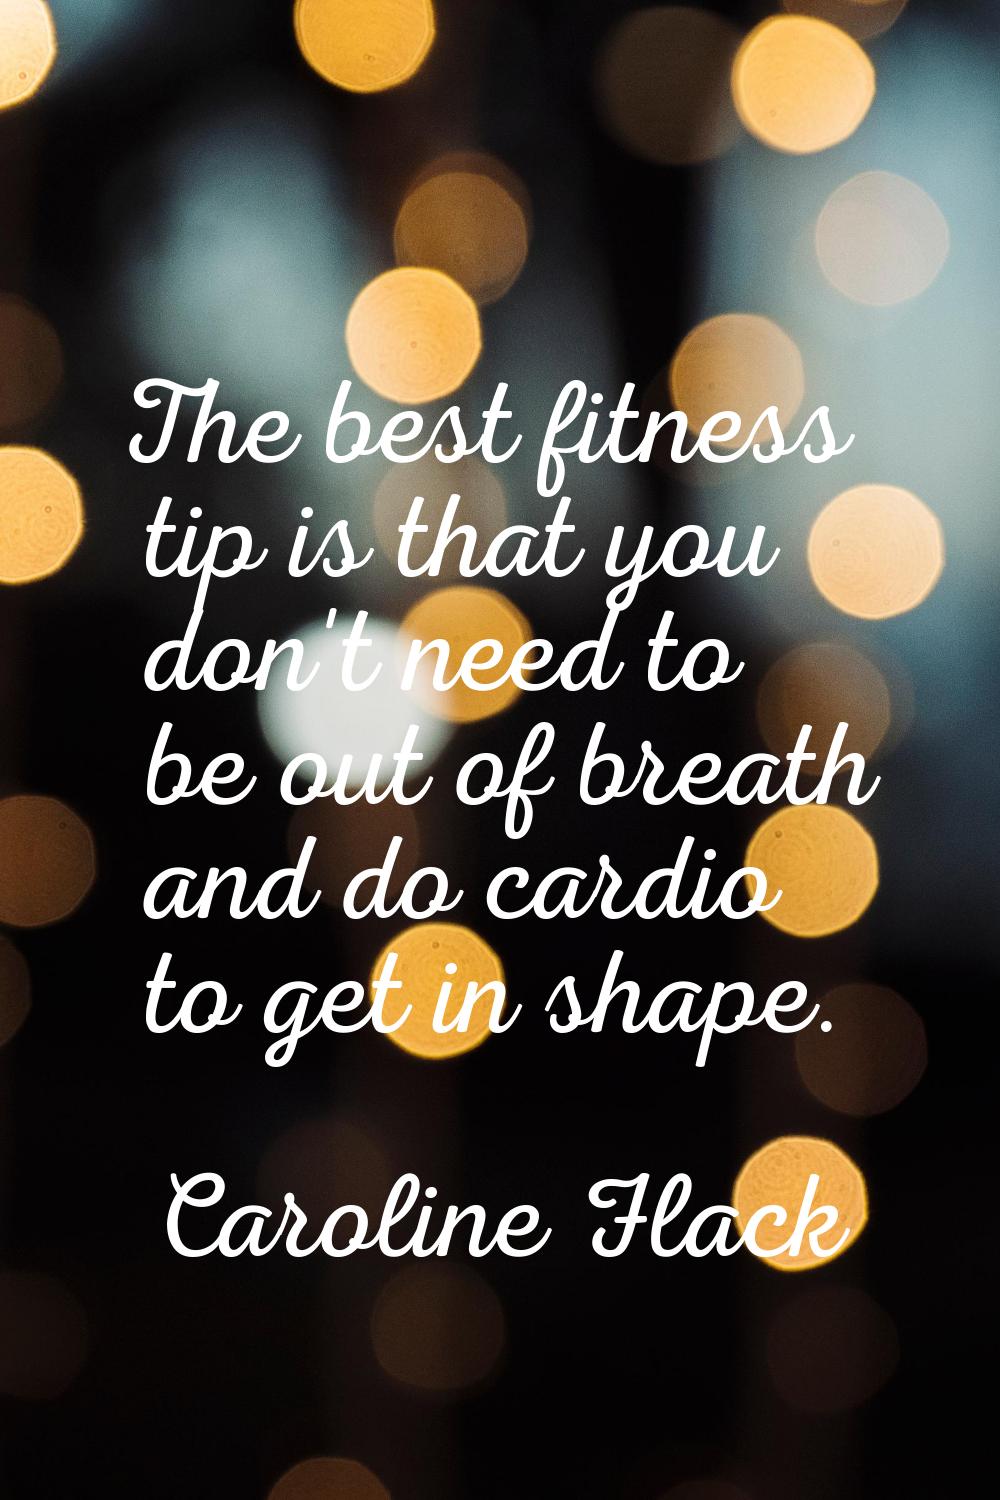 The best fitness tip is that you don't need to be out of breath and do cardio to get in shape.